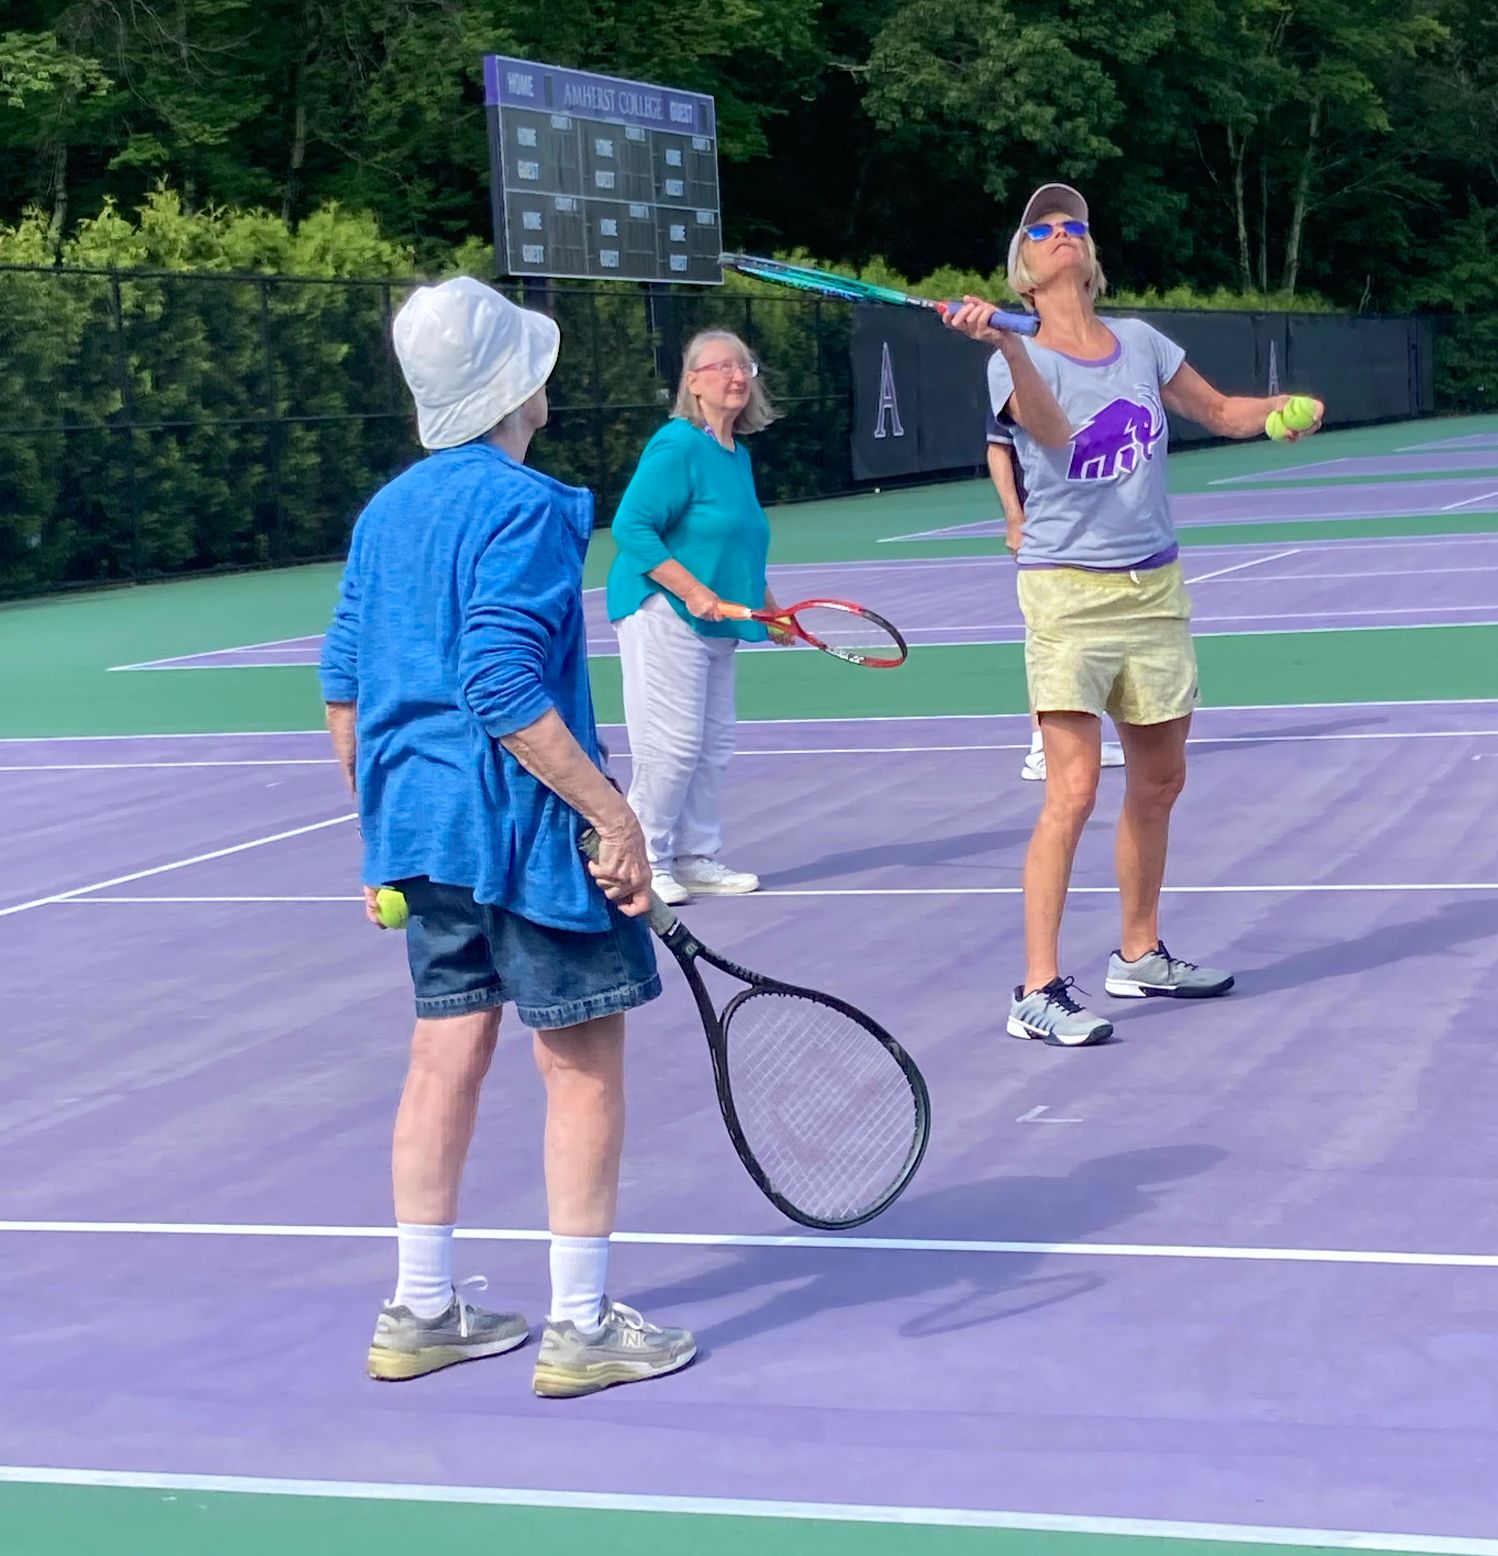 campers can practice tennis and more at ESCAPE camp in Massachusetts 